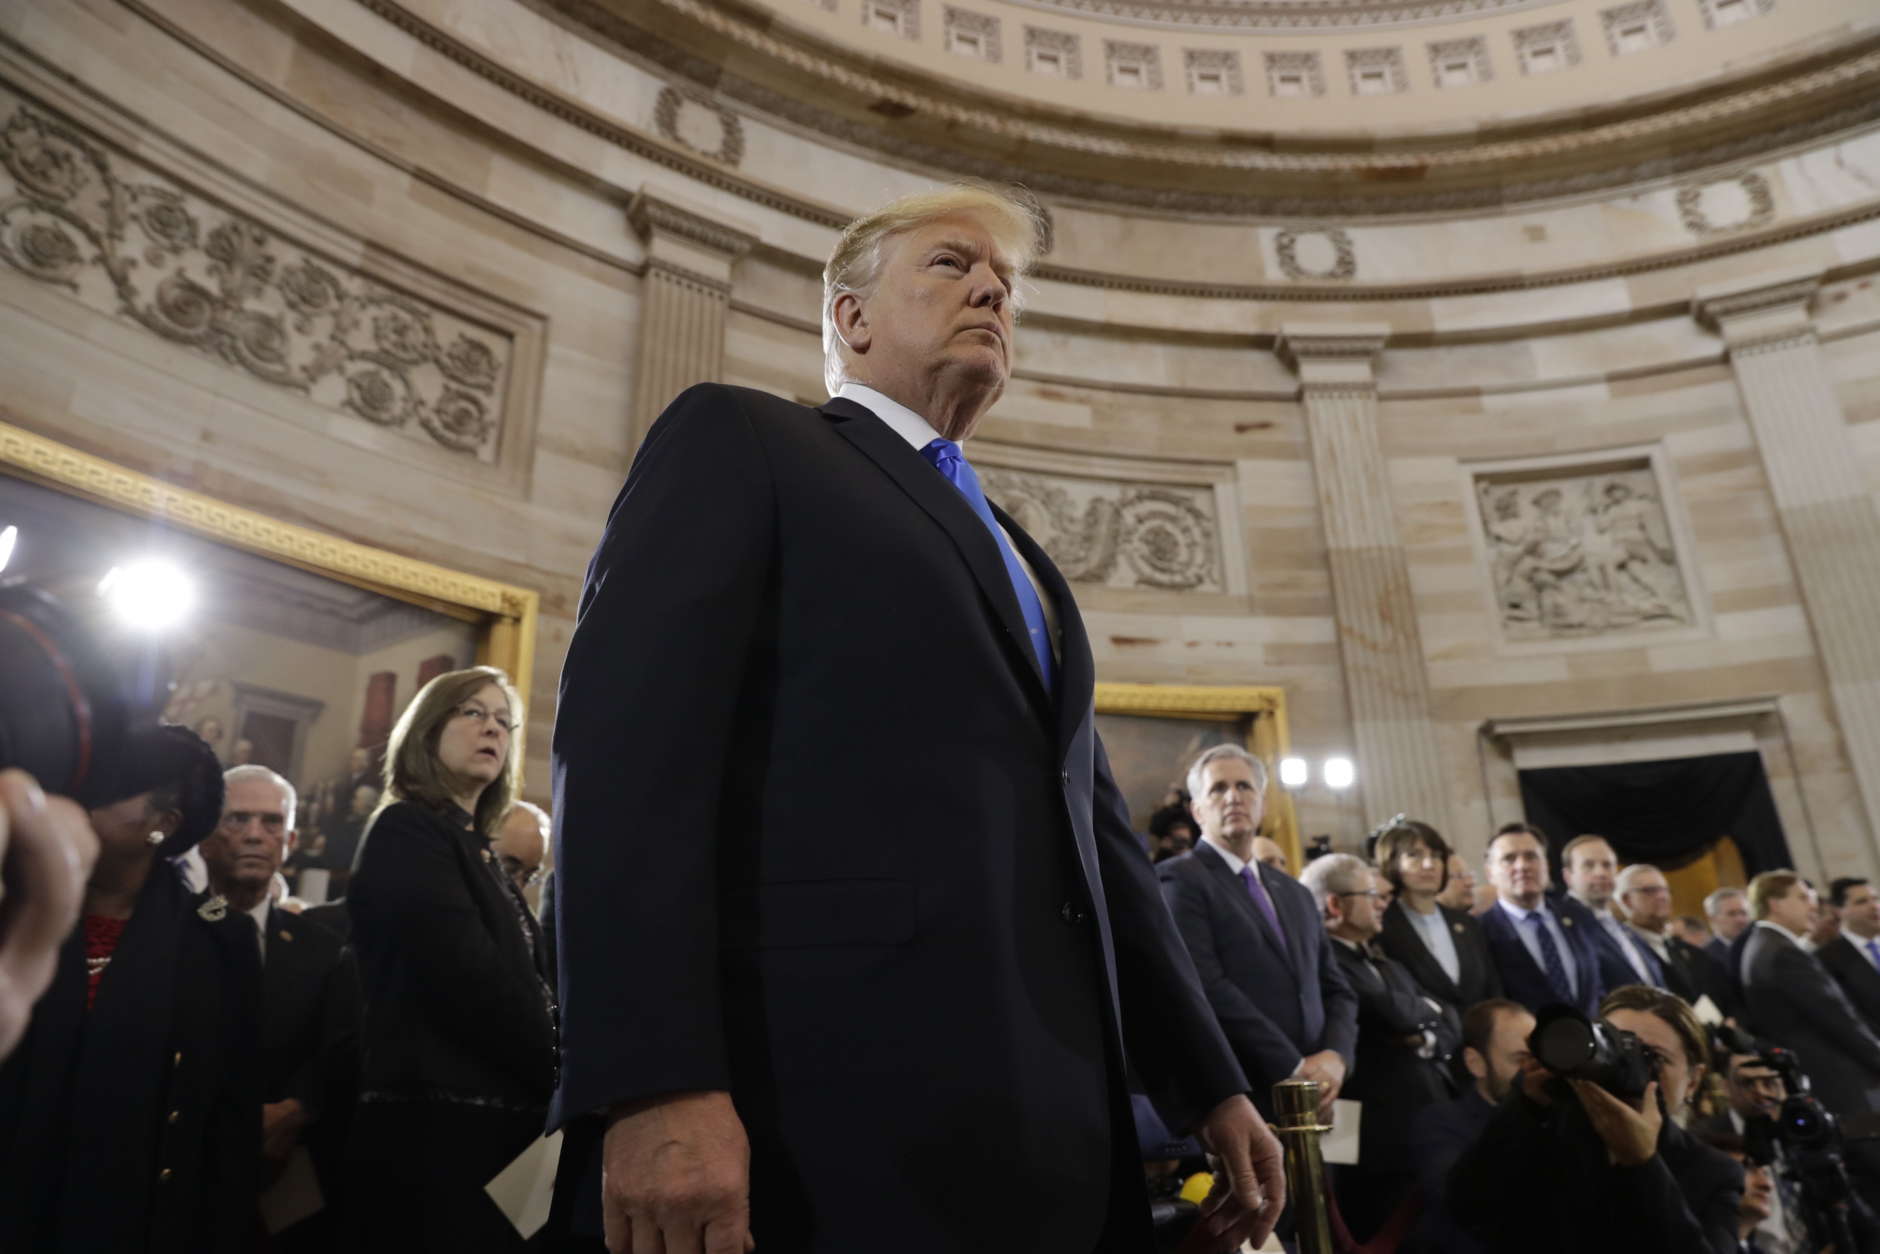 President Donald Trump arrives to participate in a ceremony honoring Reverend Billy Graham in the Rotunda of the U.S. Capitol building, Wednesday, Feb. 28, in Washington. (AP Photo/Evan Vucci)